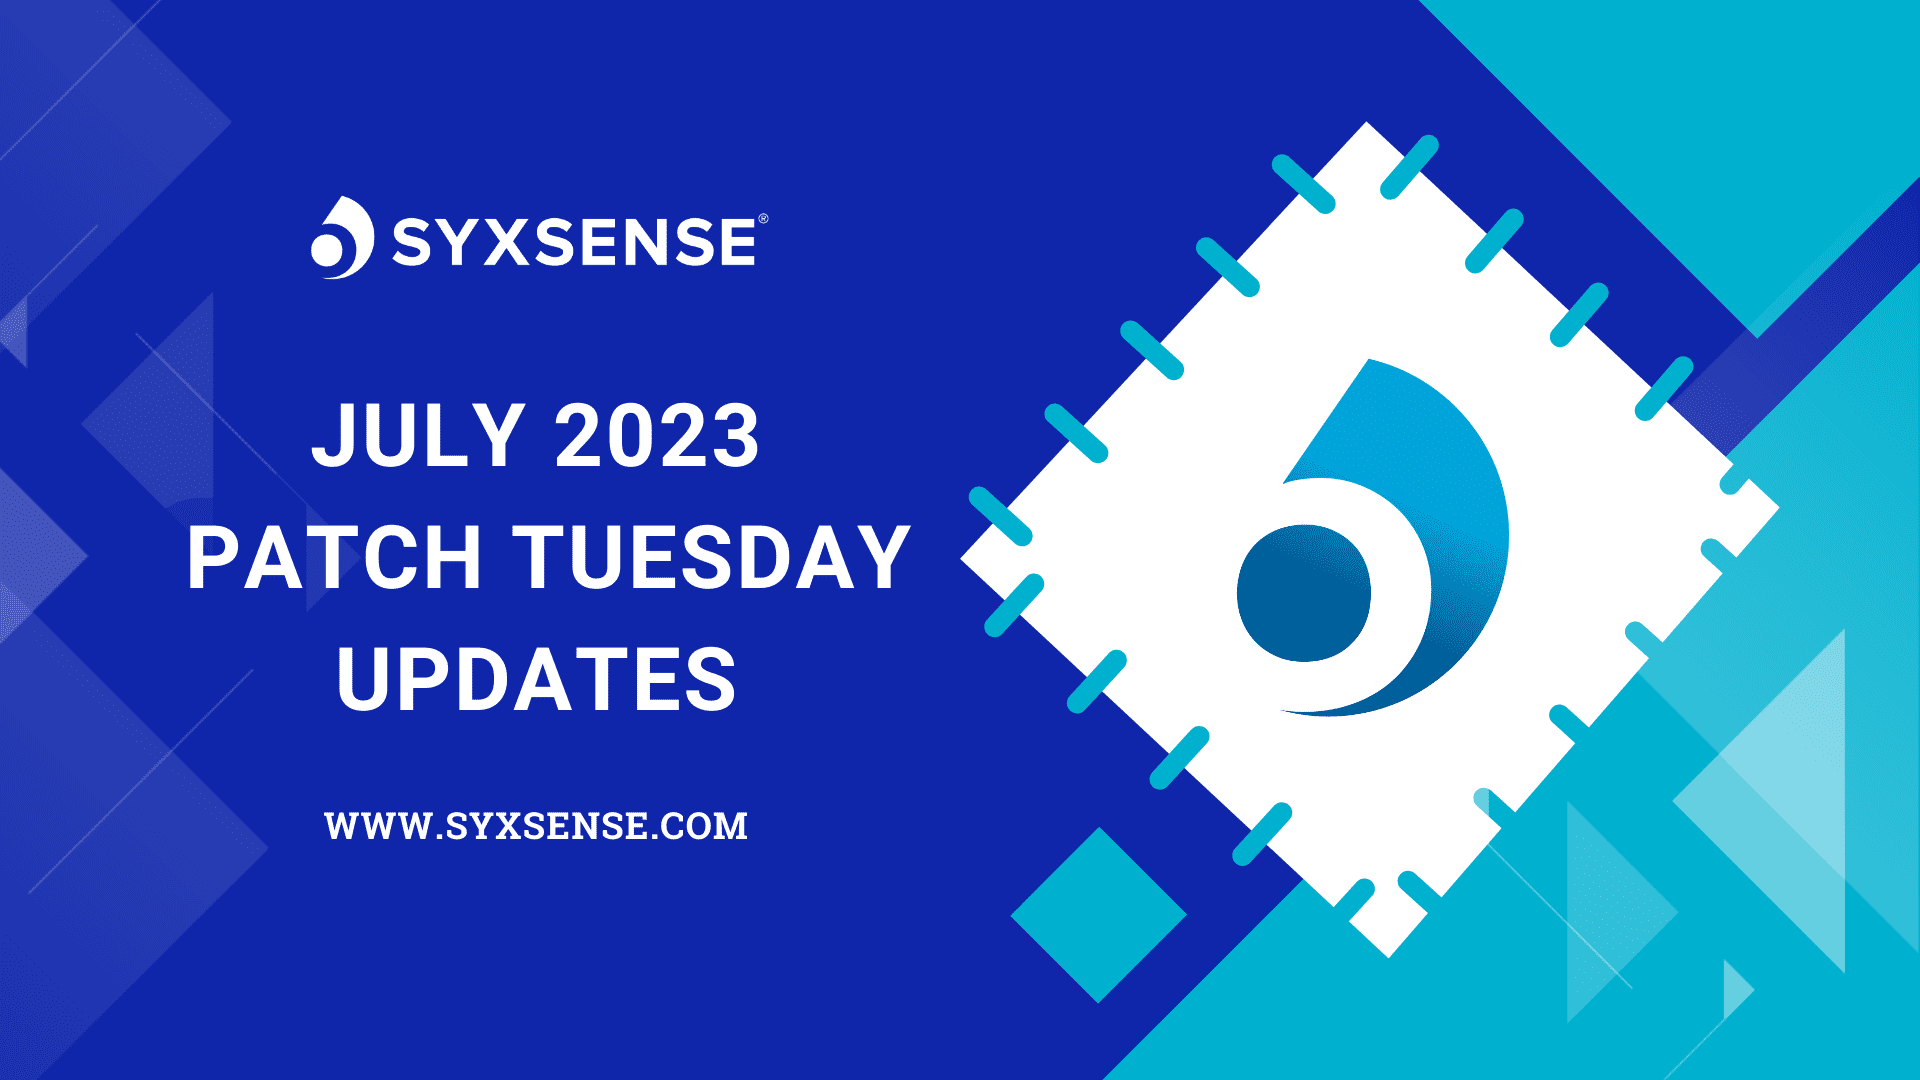 July 2023 Patch Tuesday